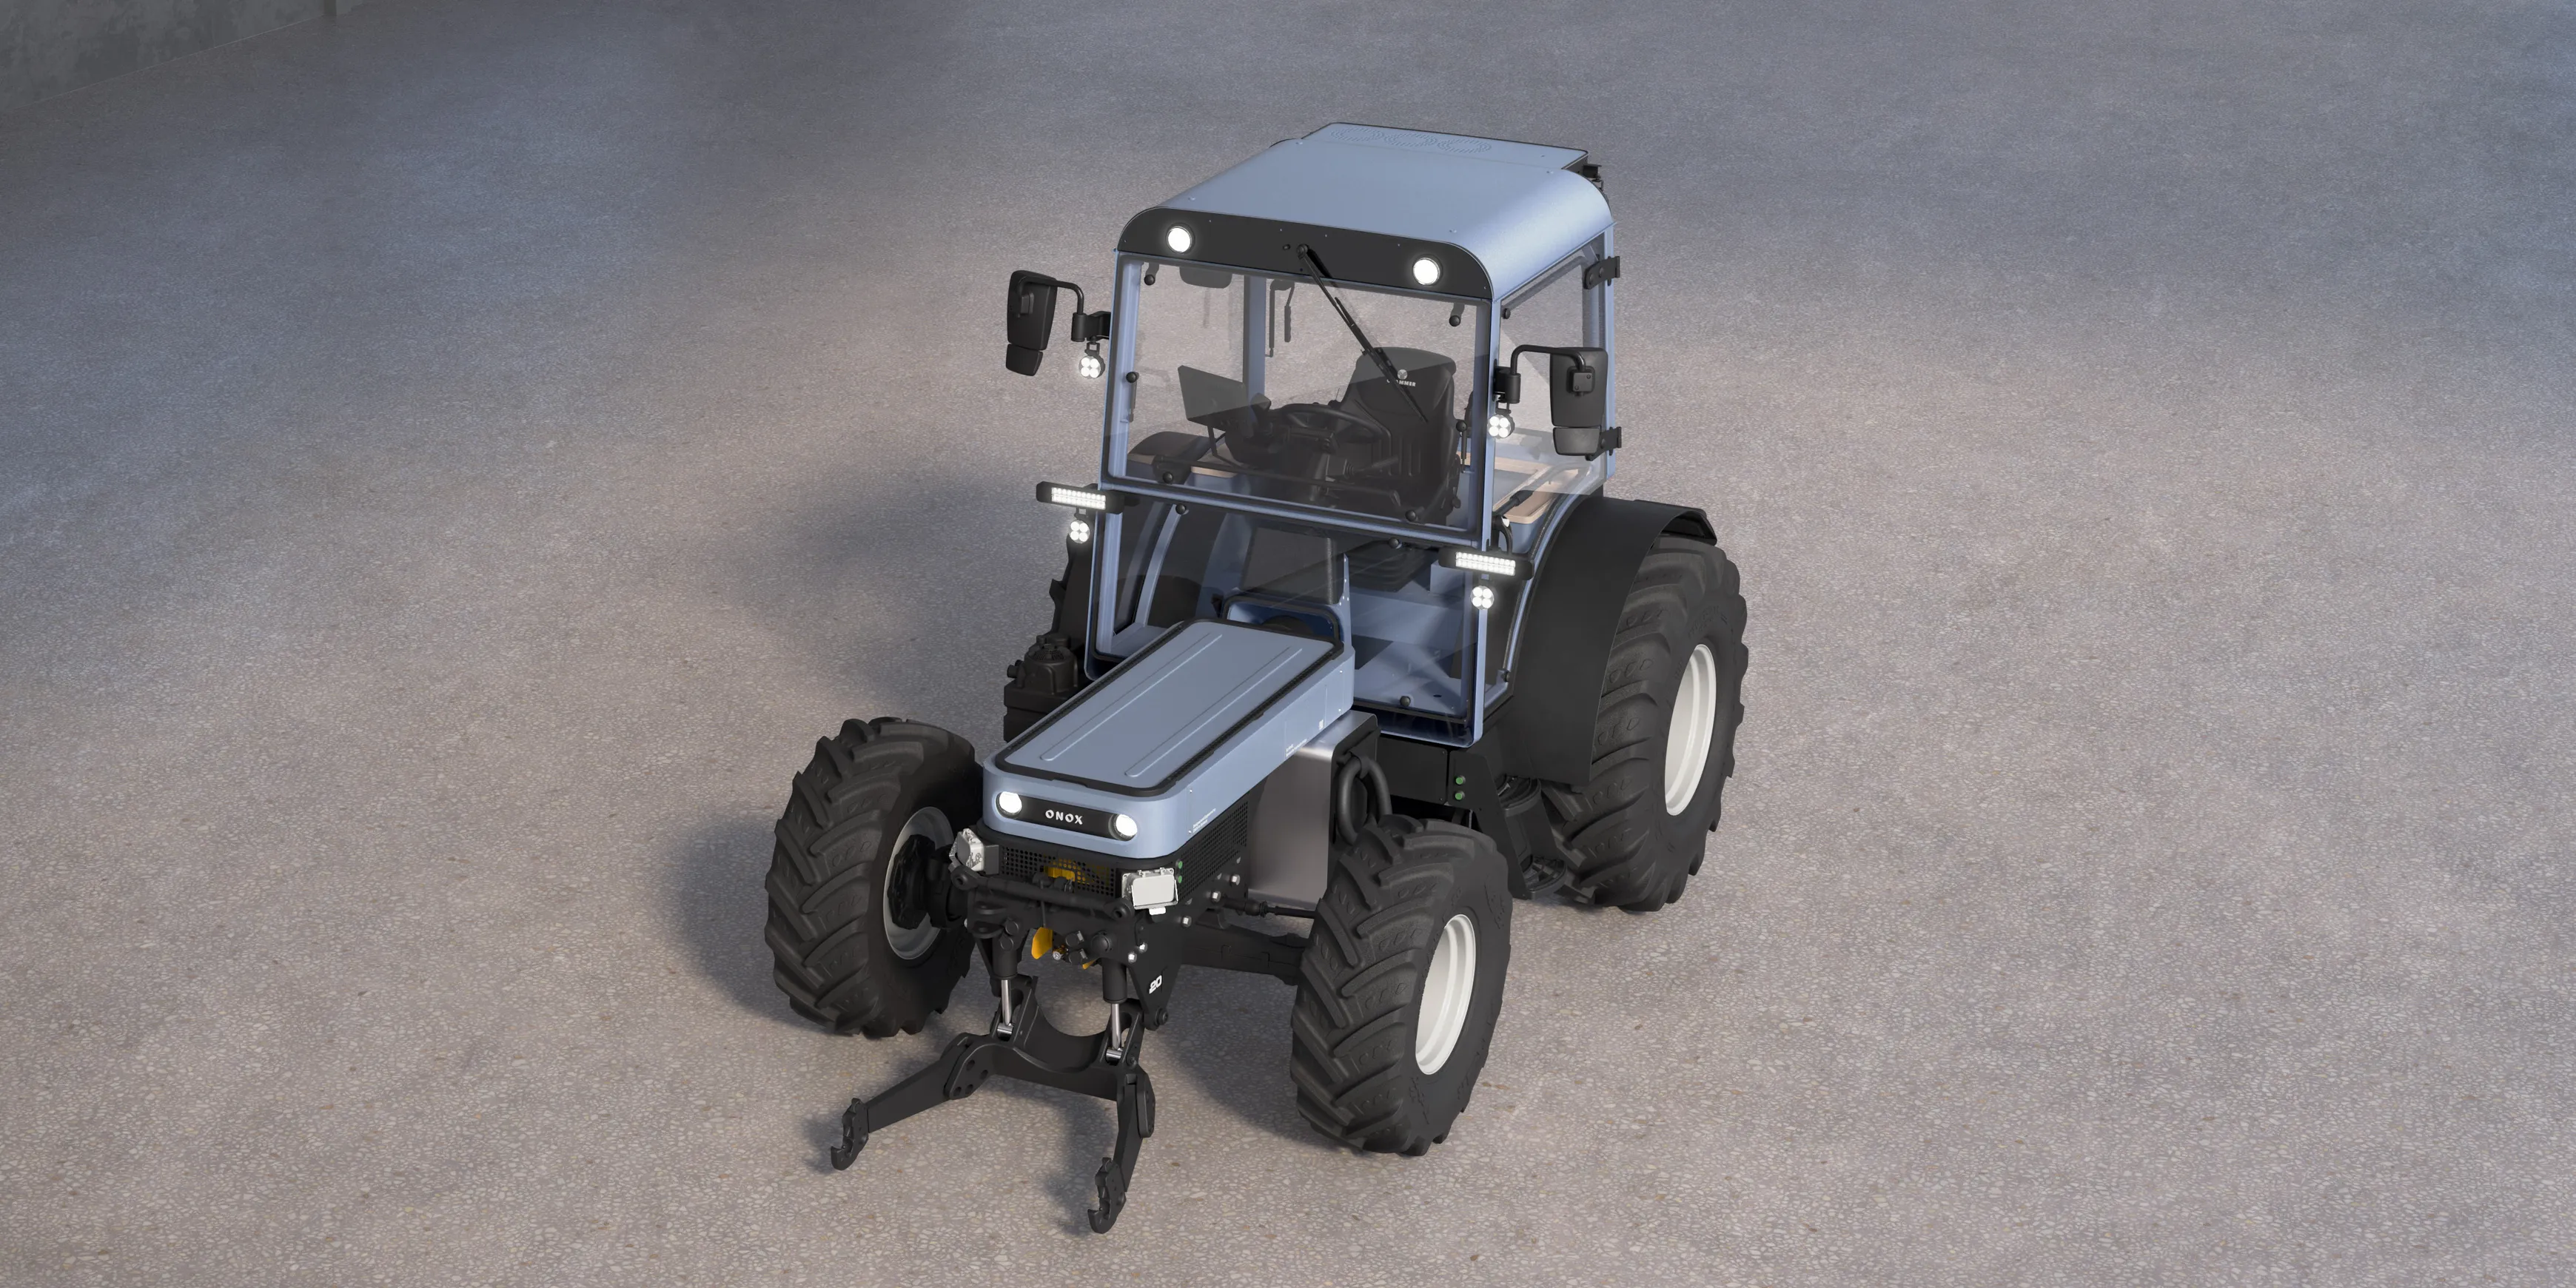 A frontal perspective view of the Onox electric tractor on a concrete floor